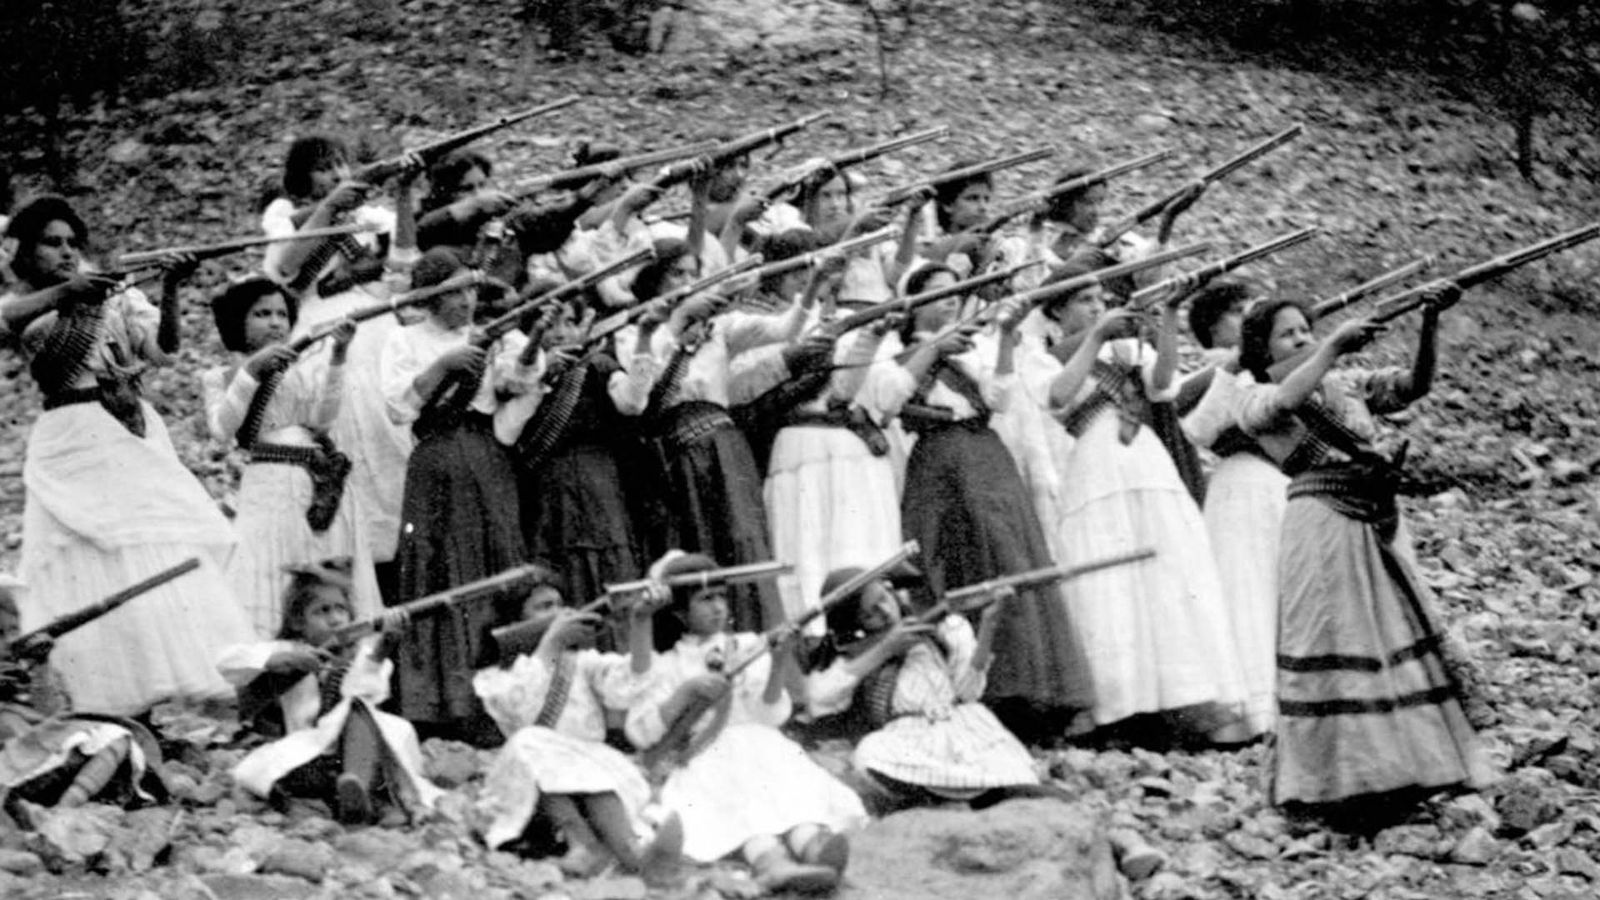 [Soldaderas holding rifles.] Prints and Photographs Division, Library of Congress. LC-USZ62-25760